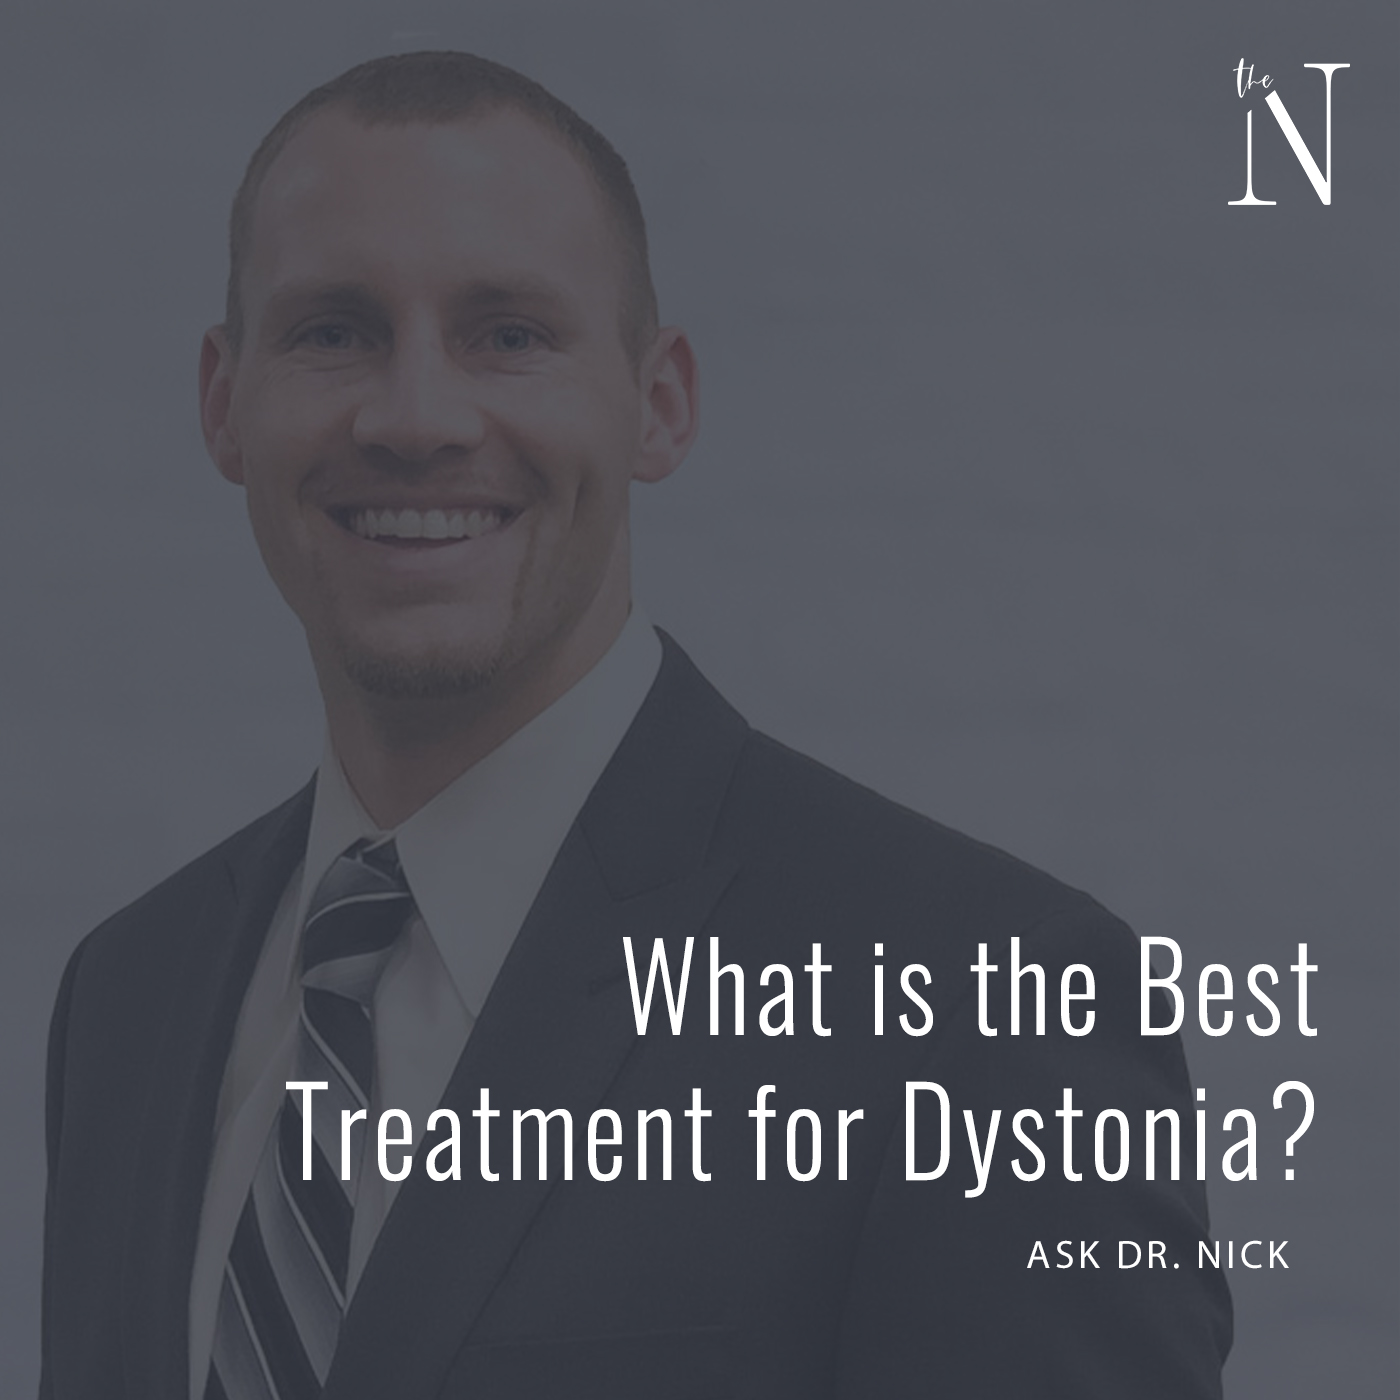 treatment for dystonia